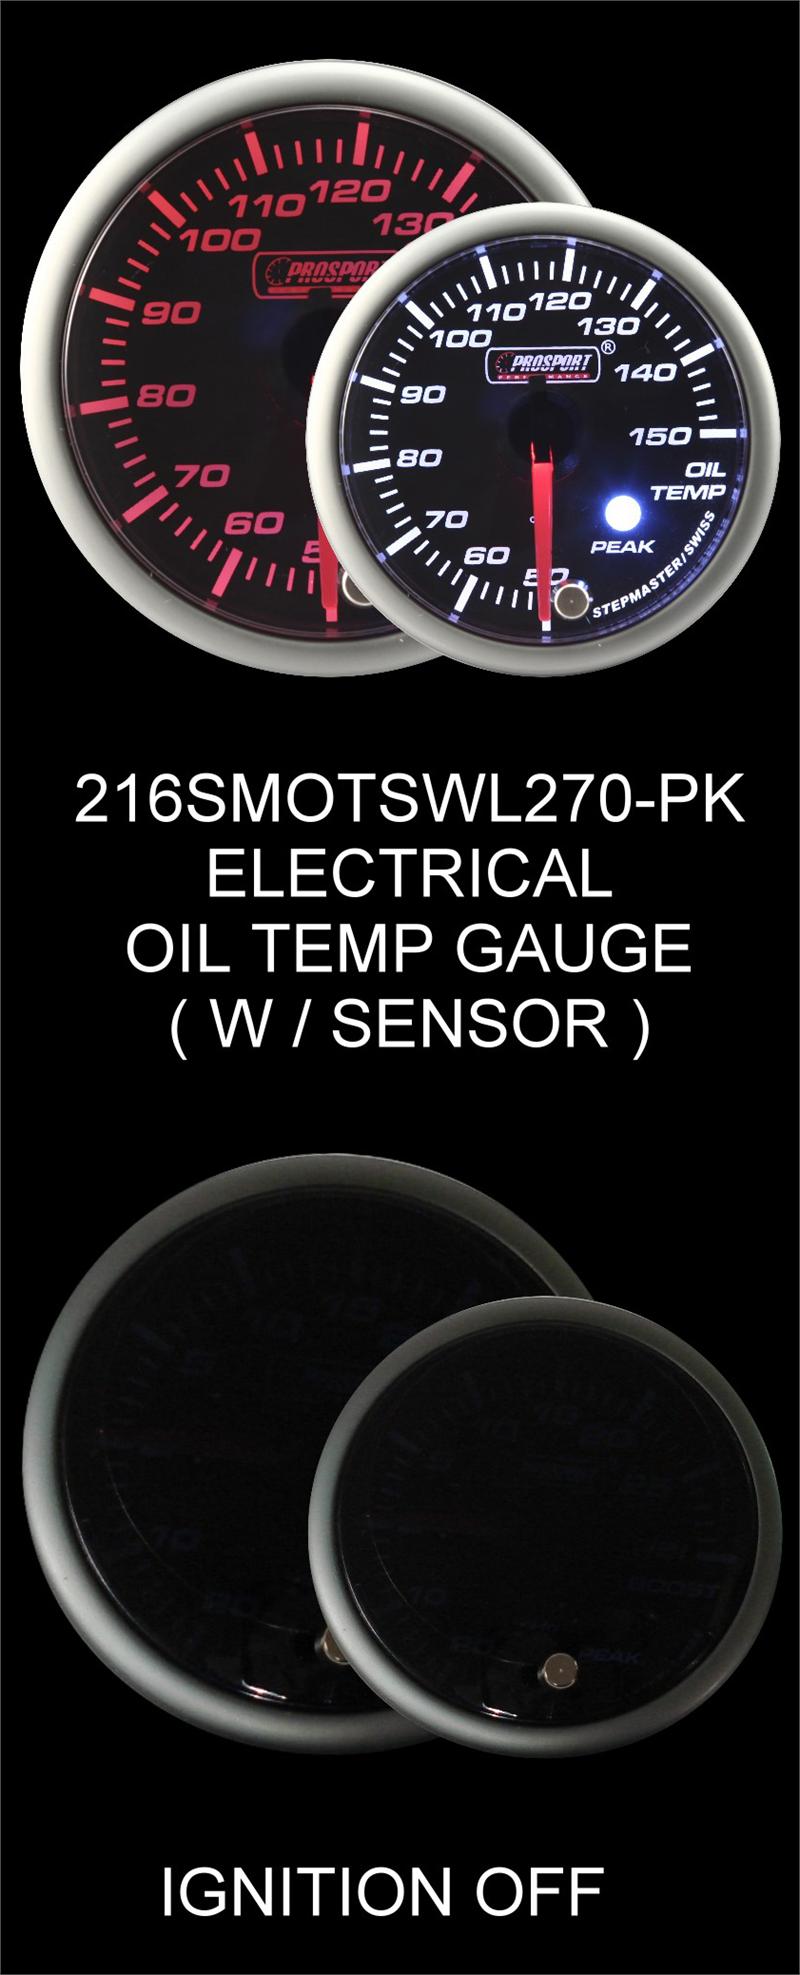 52mm Metric Electrical Oil Temp Gauge with Warning and Peak